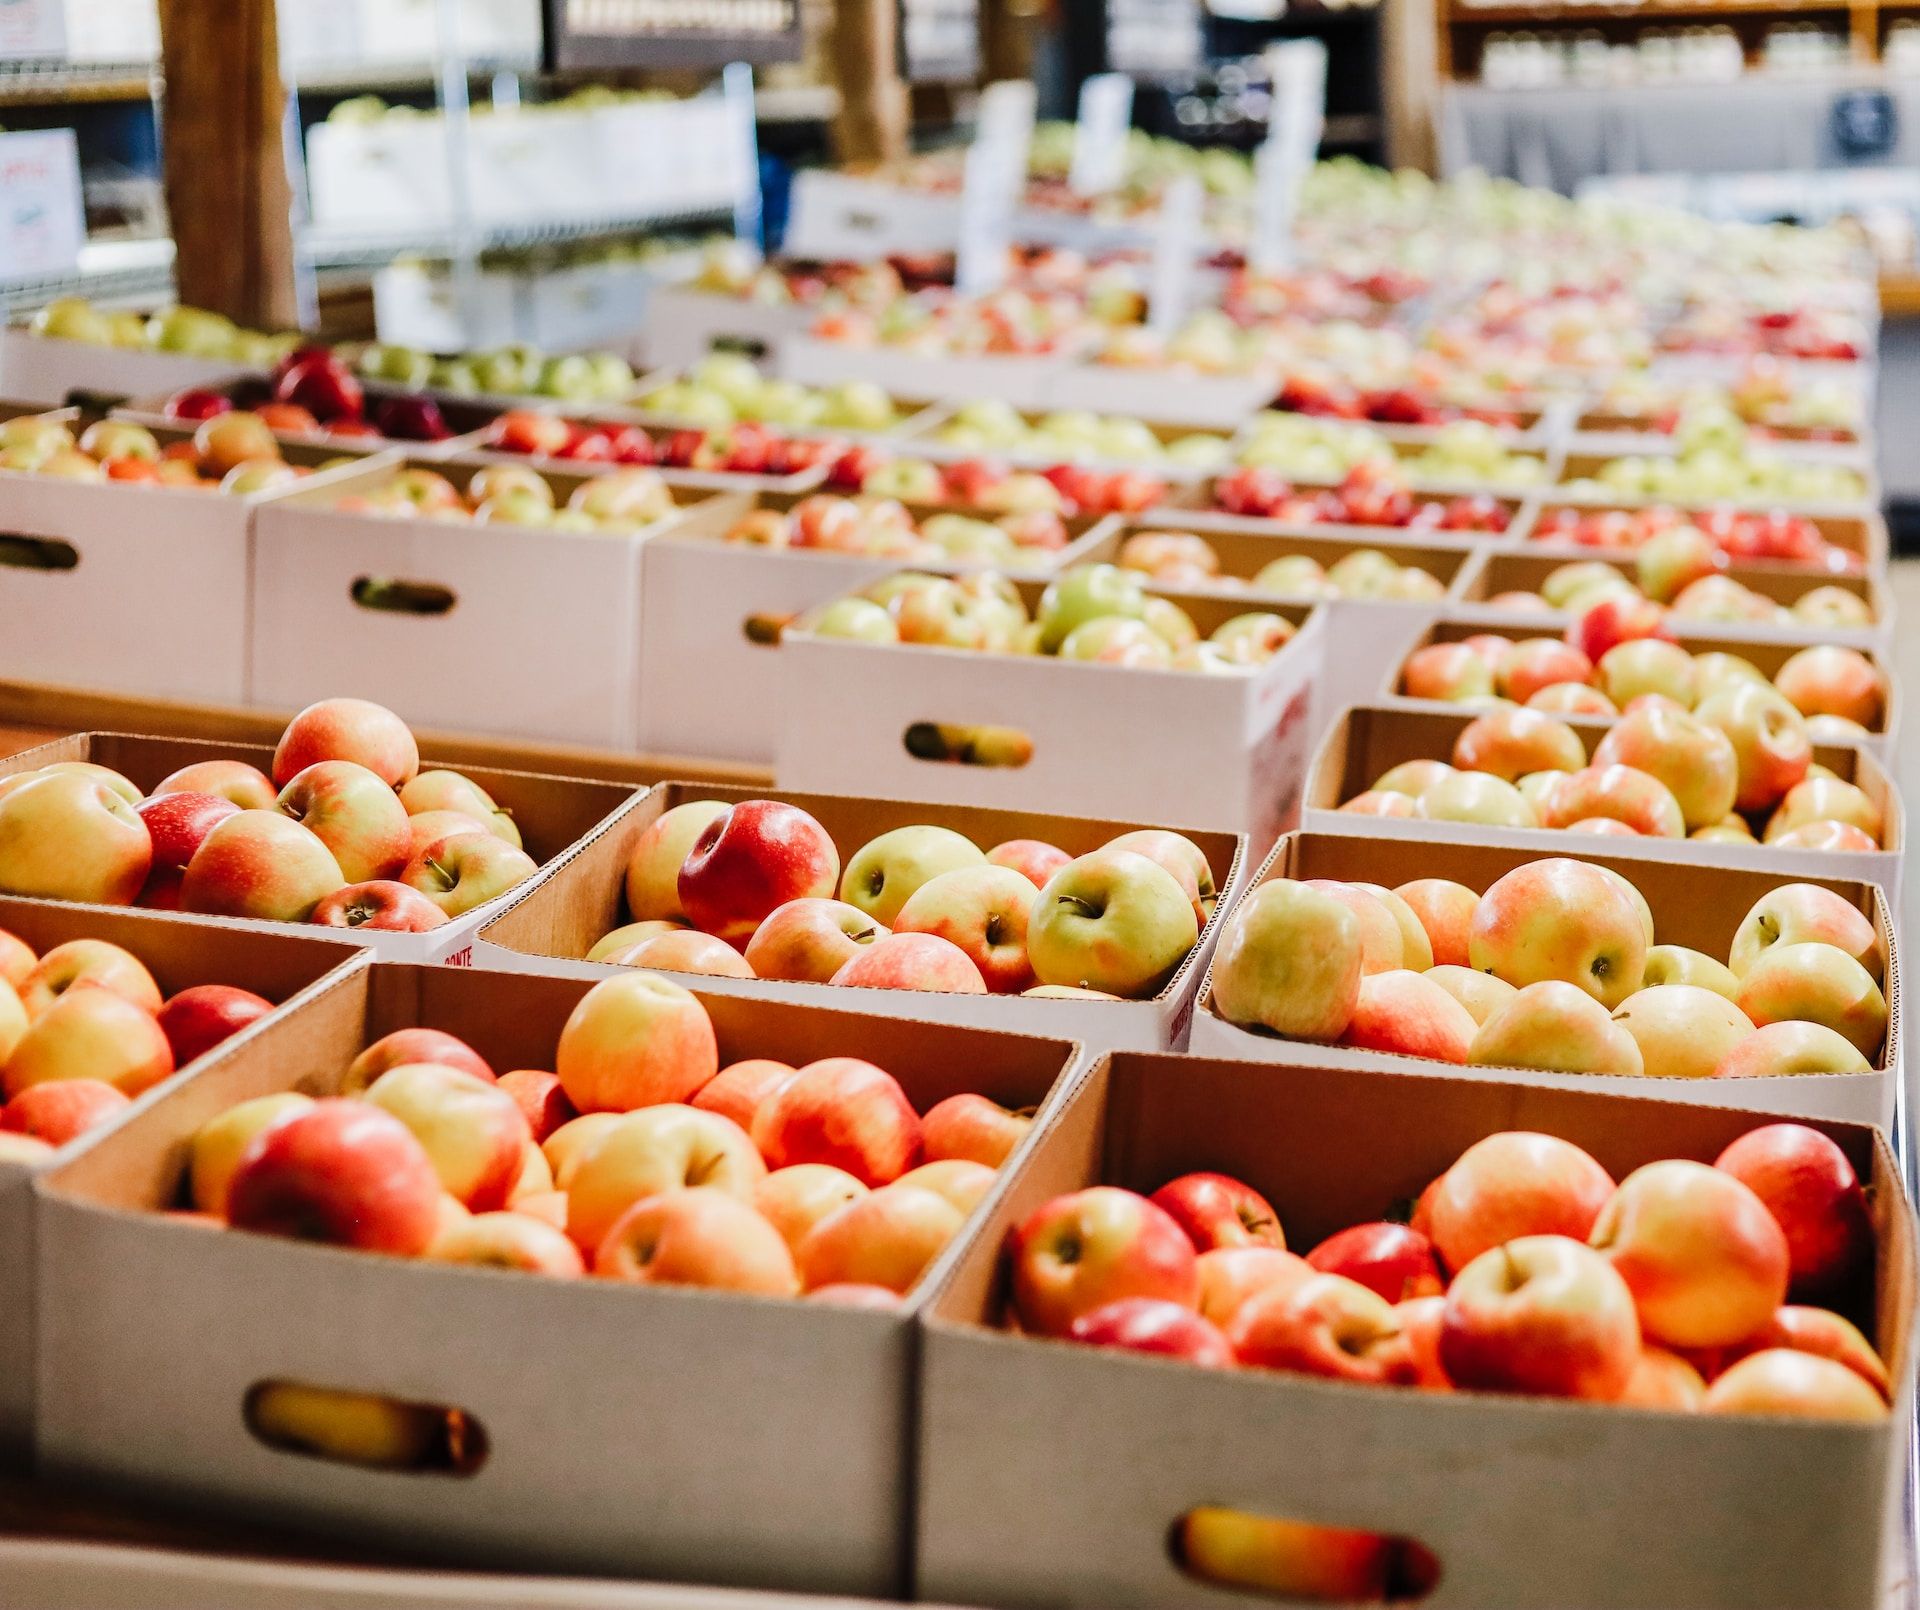 Crates of Apples for sale at Apple Hill, Placerville, California